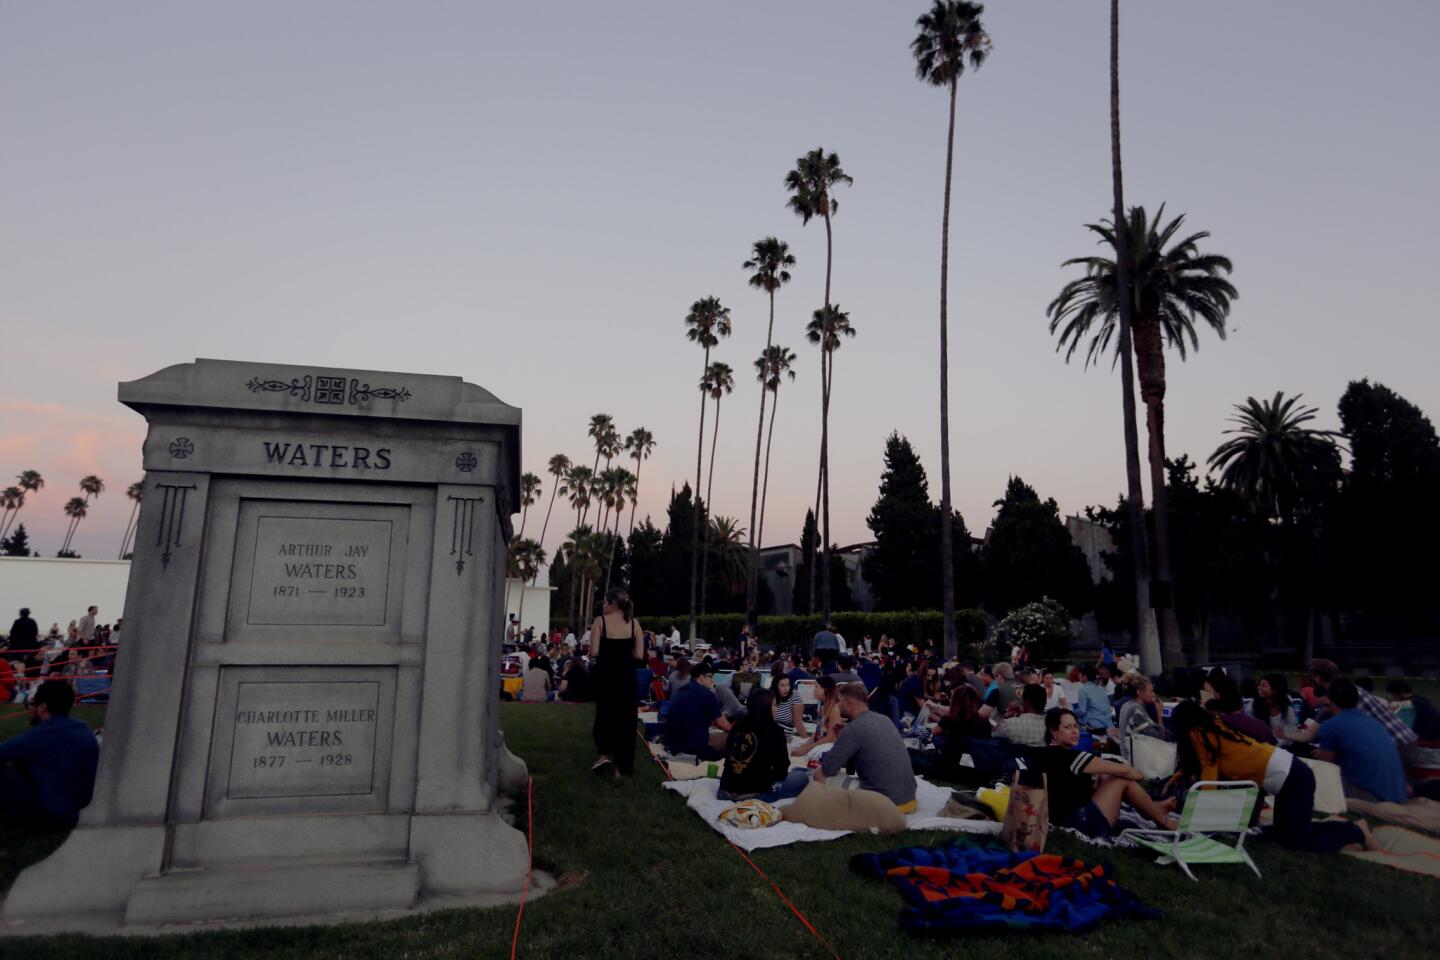 John Wyatt and the Hollywood Forever Cemetery screening series